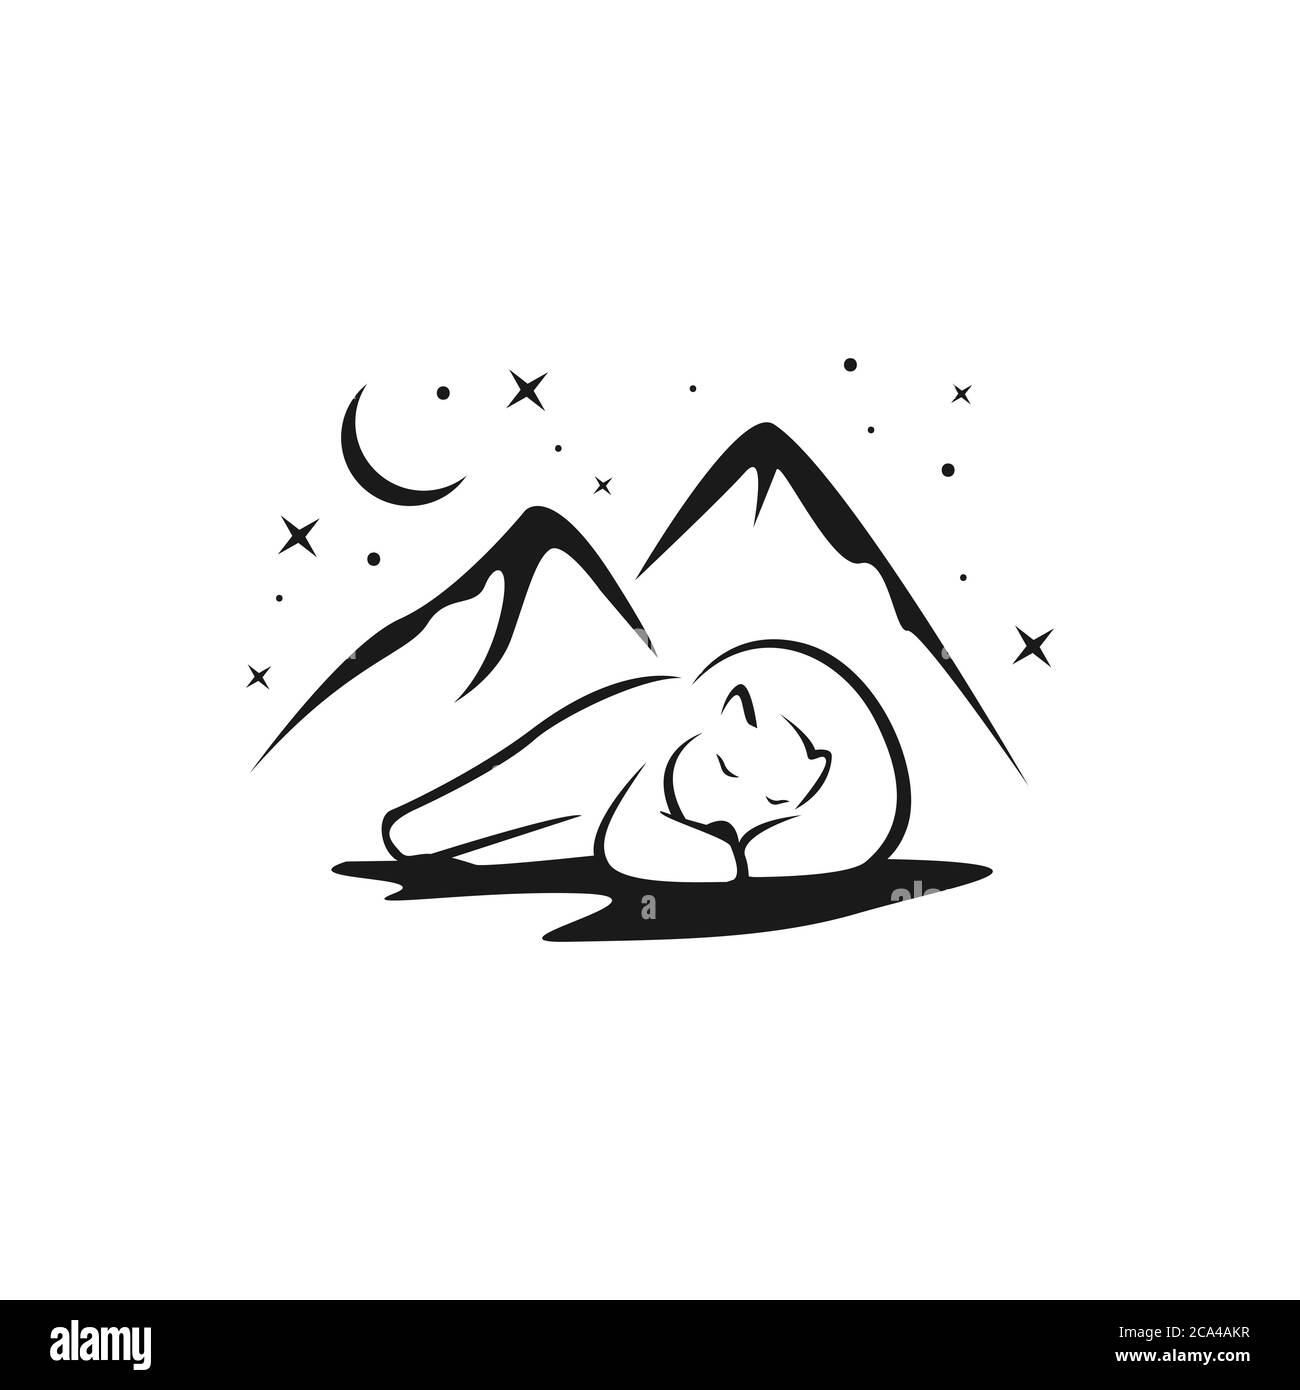 silhouette of sleeping bear vector illustration isolated on a white background Stock Vector